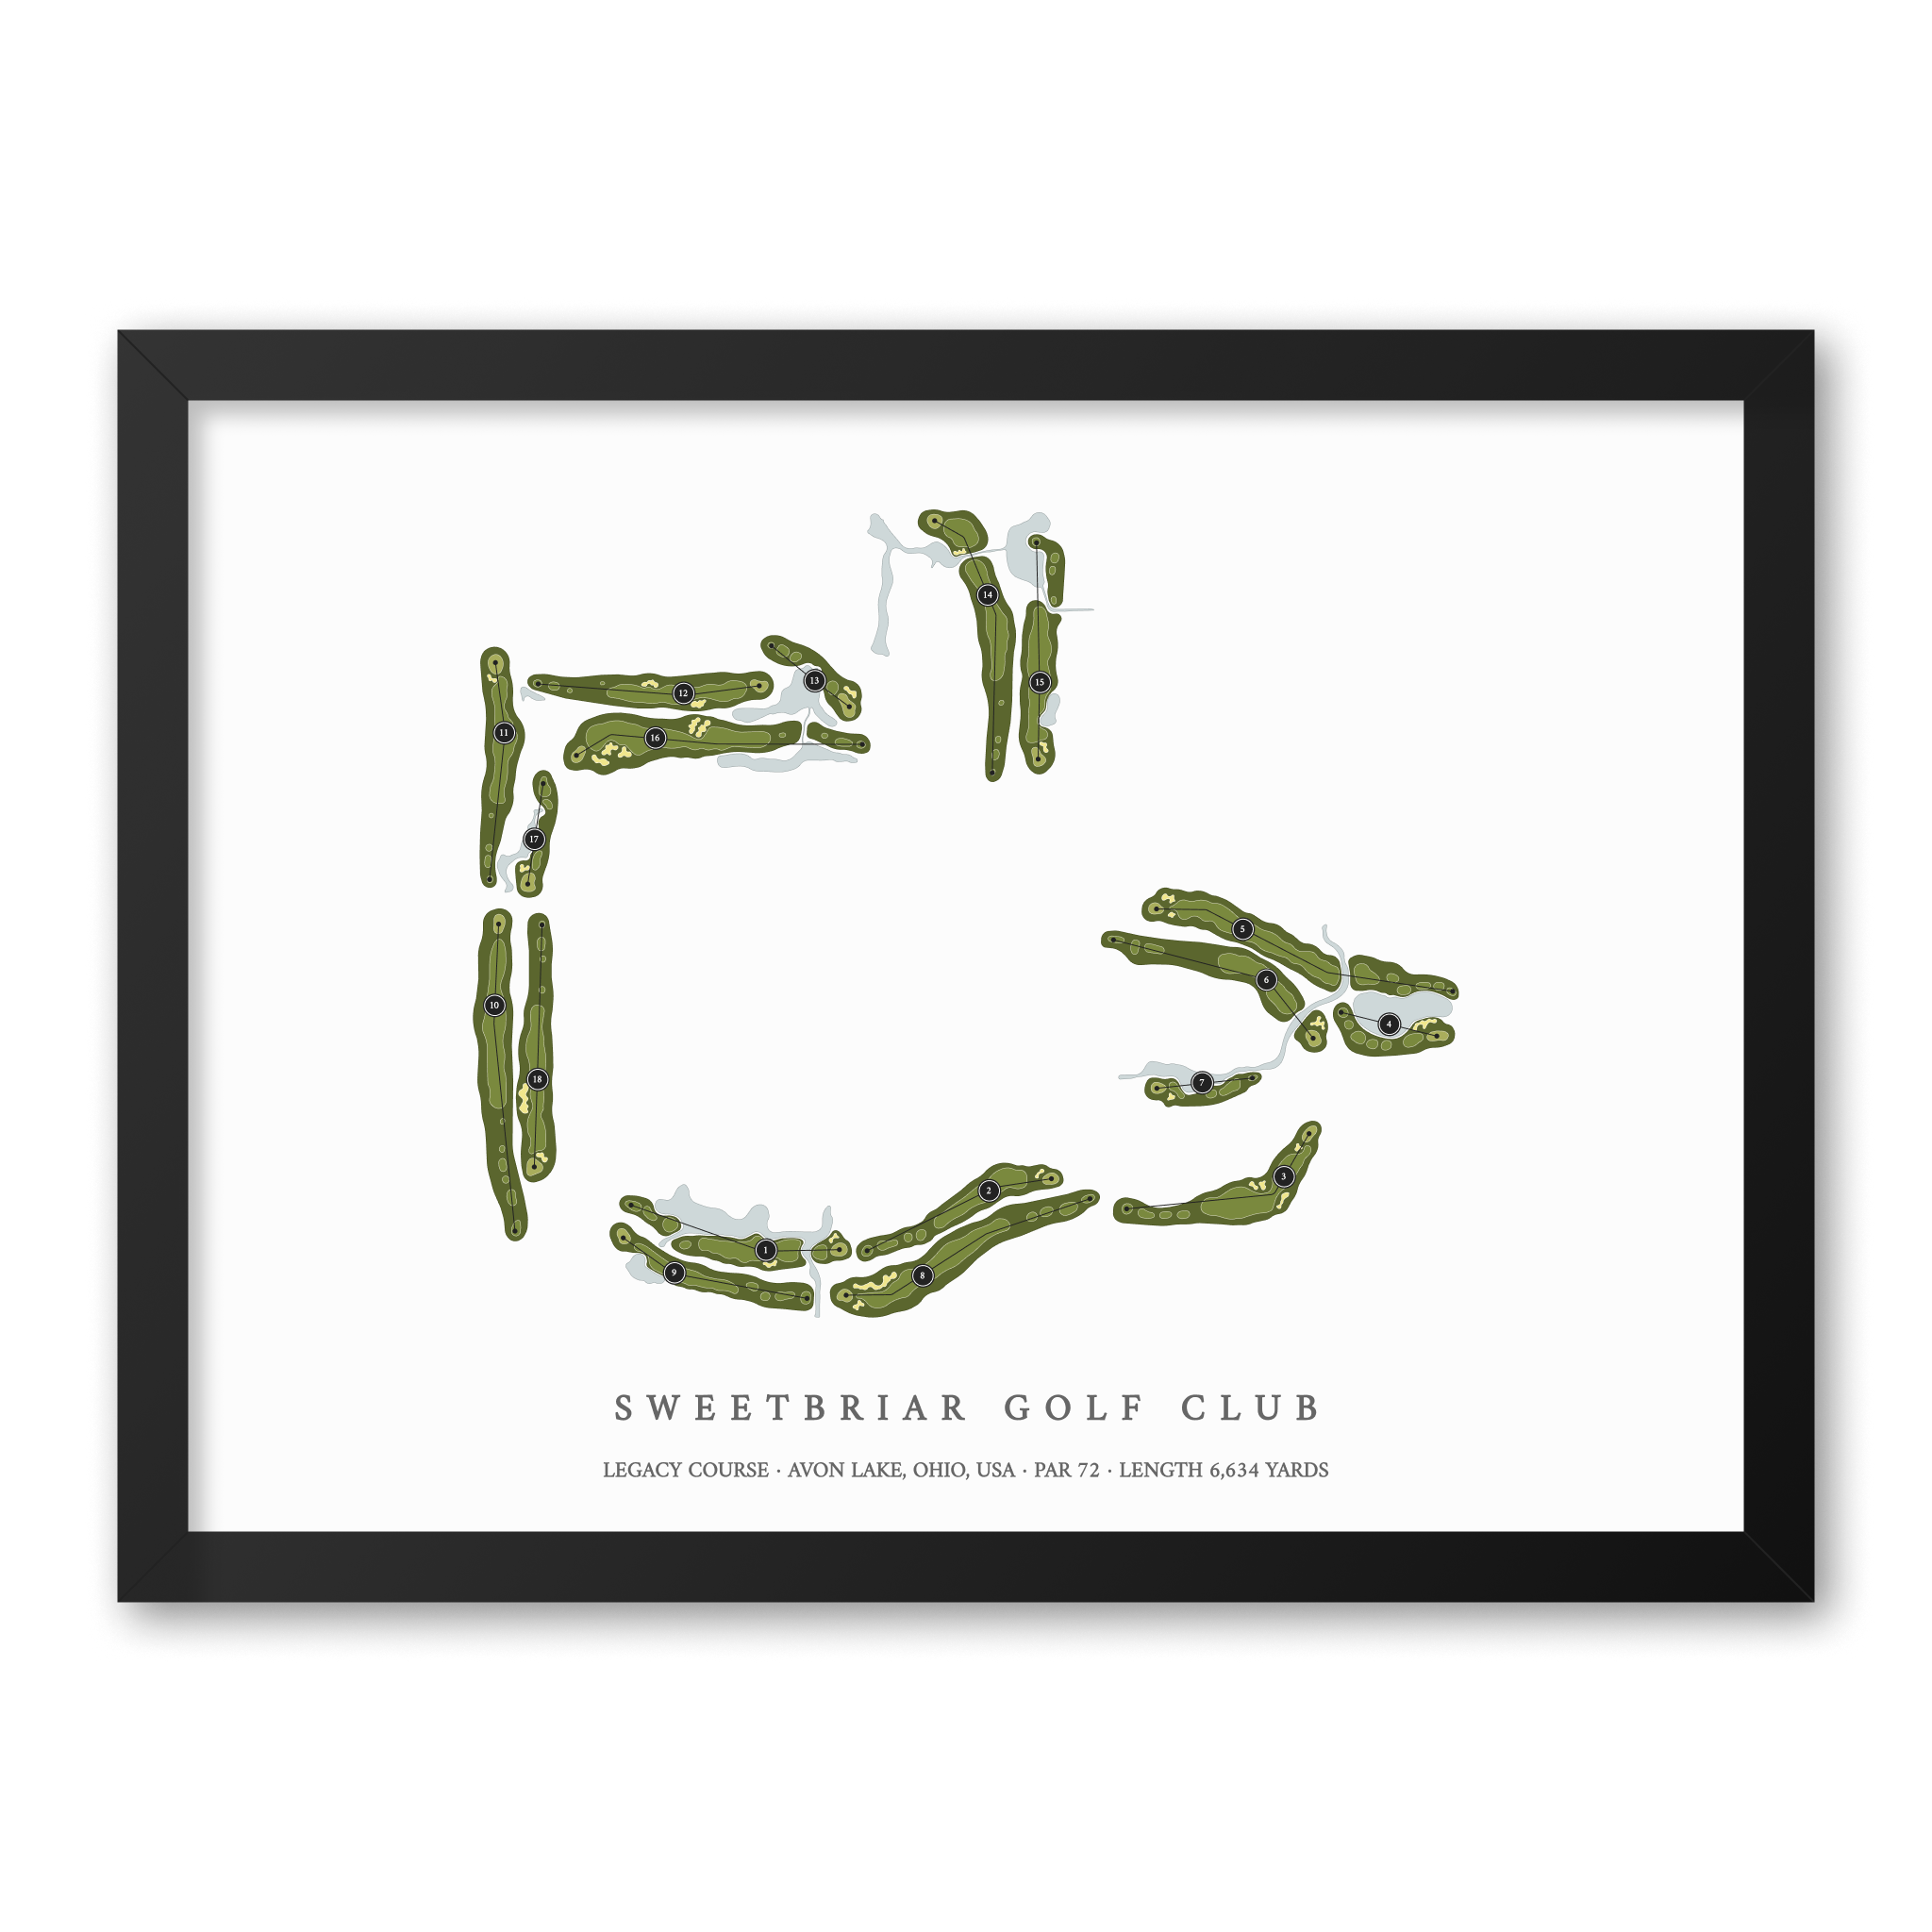 Sweetbriar Golf Club - Legacy Course | Golf Course Map | Black Frame With Hole Numbers #hole numbers_yes